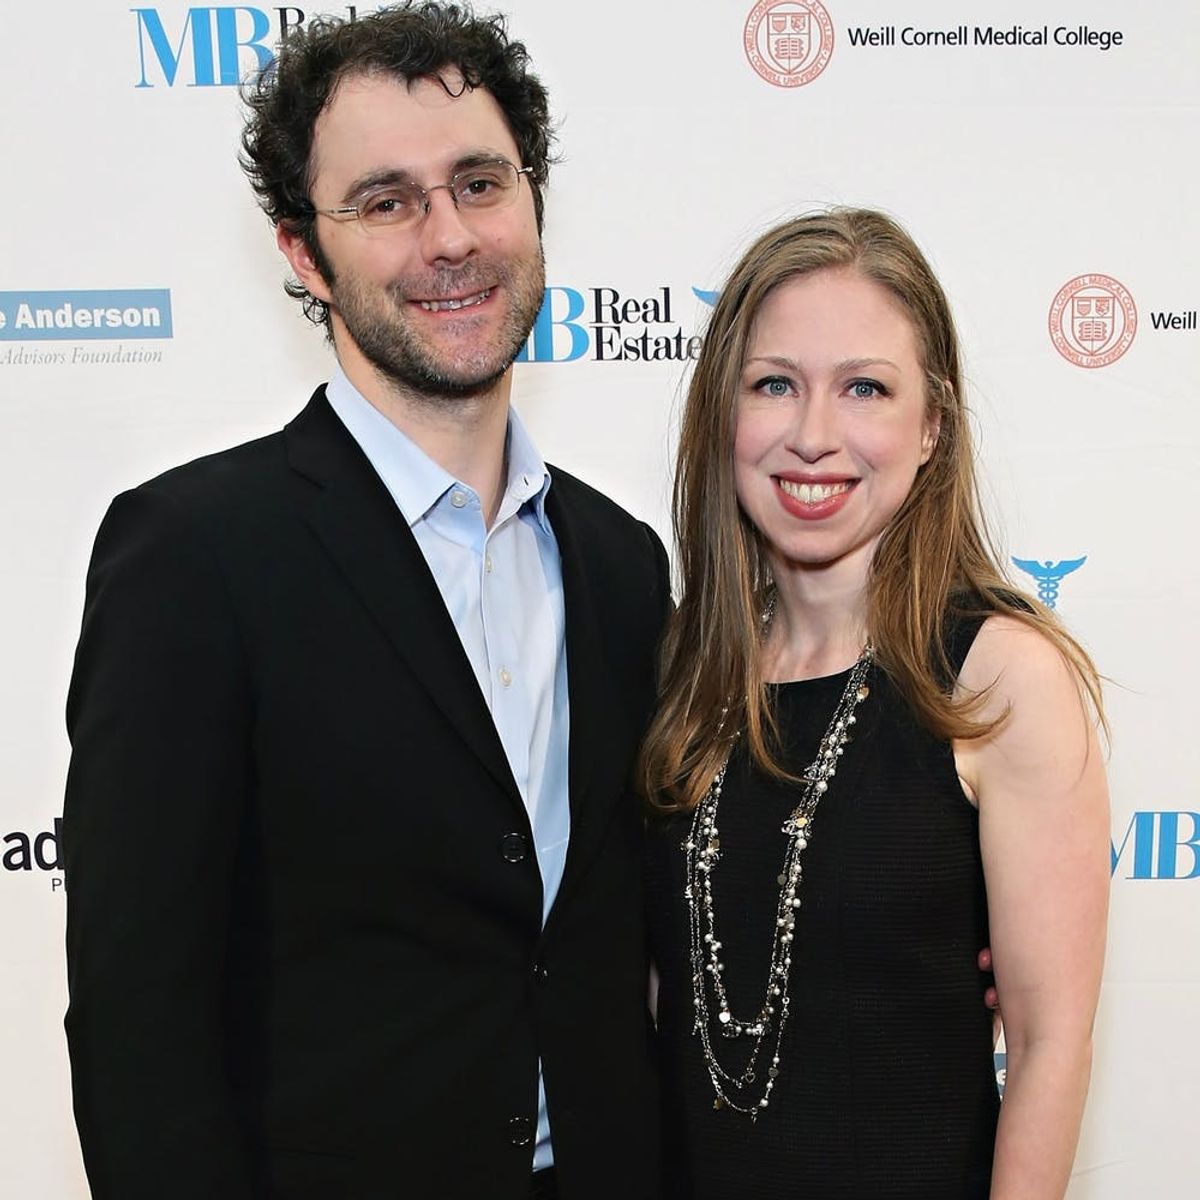 This Is the Super Sweet Name Chelsea Clinton Has Chosen for Her Newborn Baby